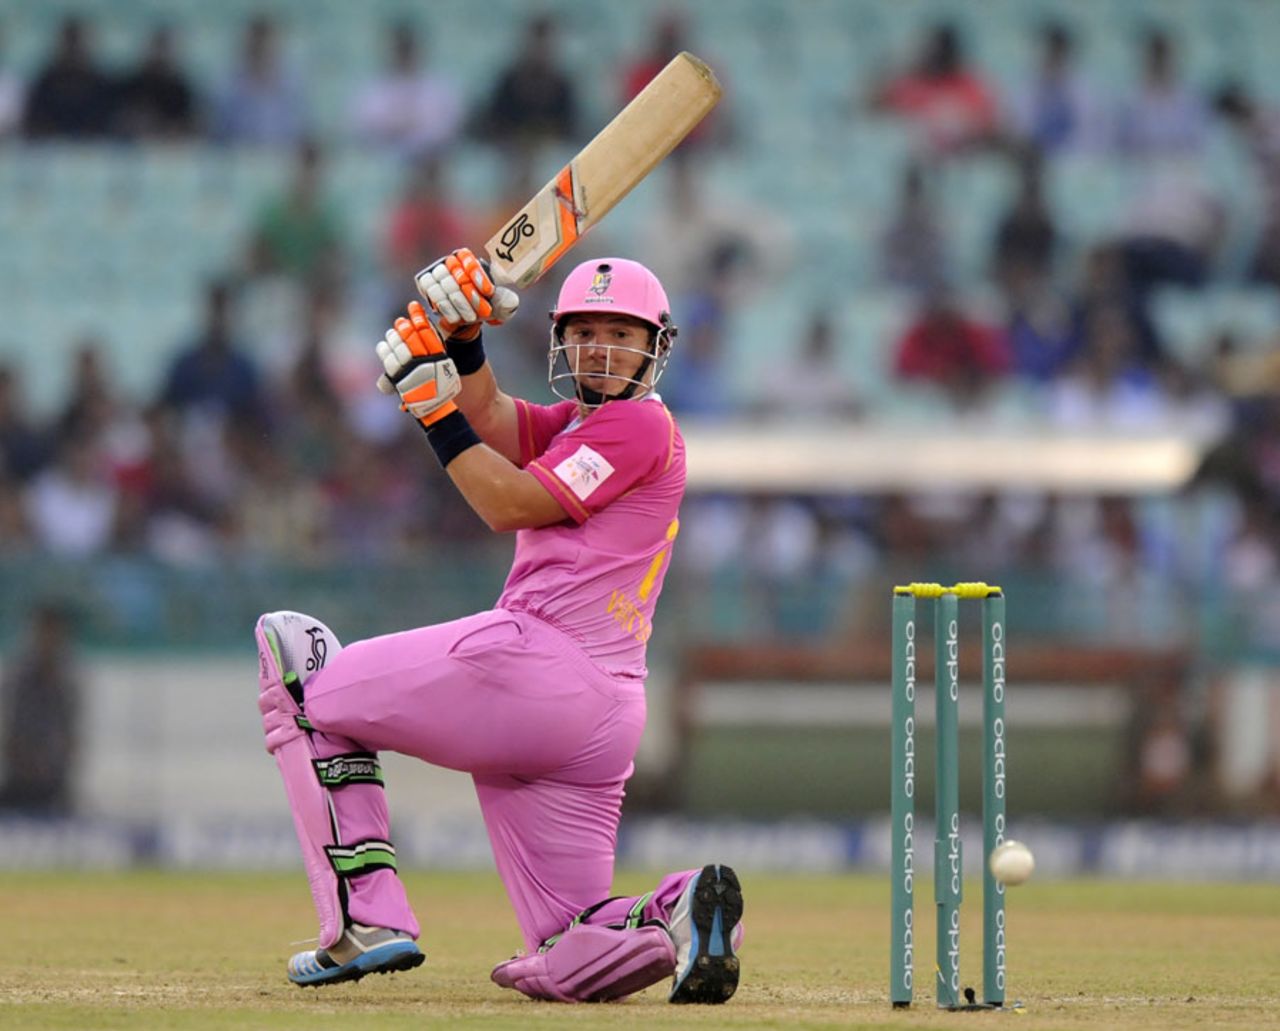 BJ Watling slammed seven fours and a six, Northern Knights v Lahore Lions, CLT20, Raipur, September 14, 2014